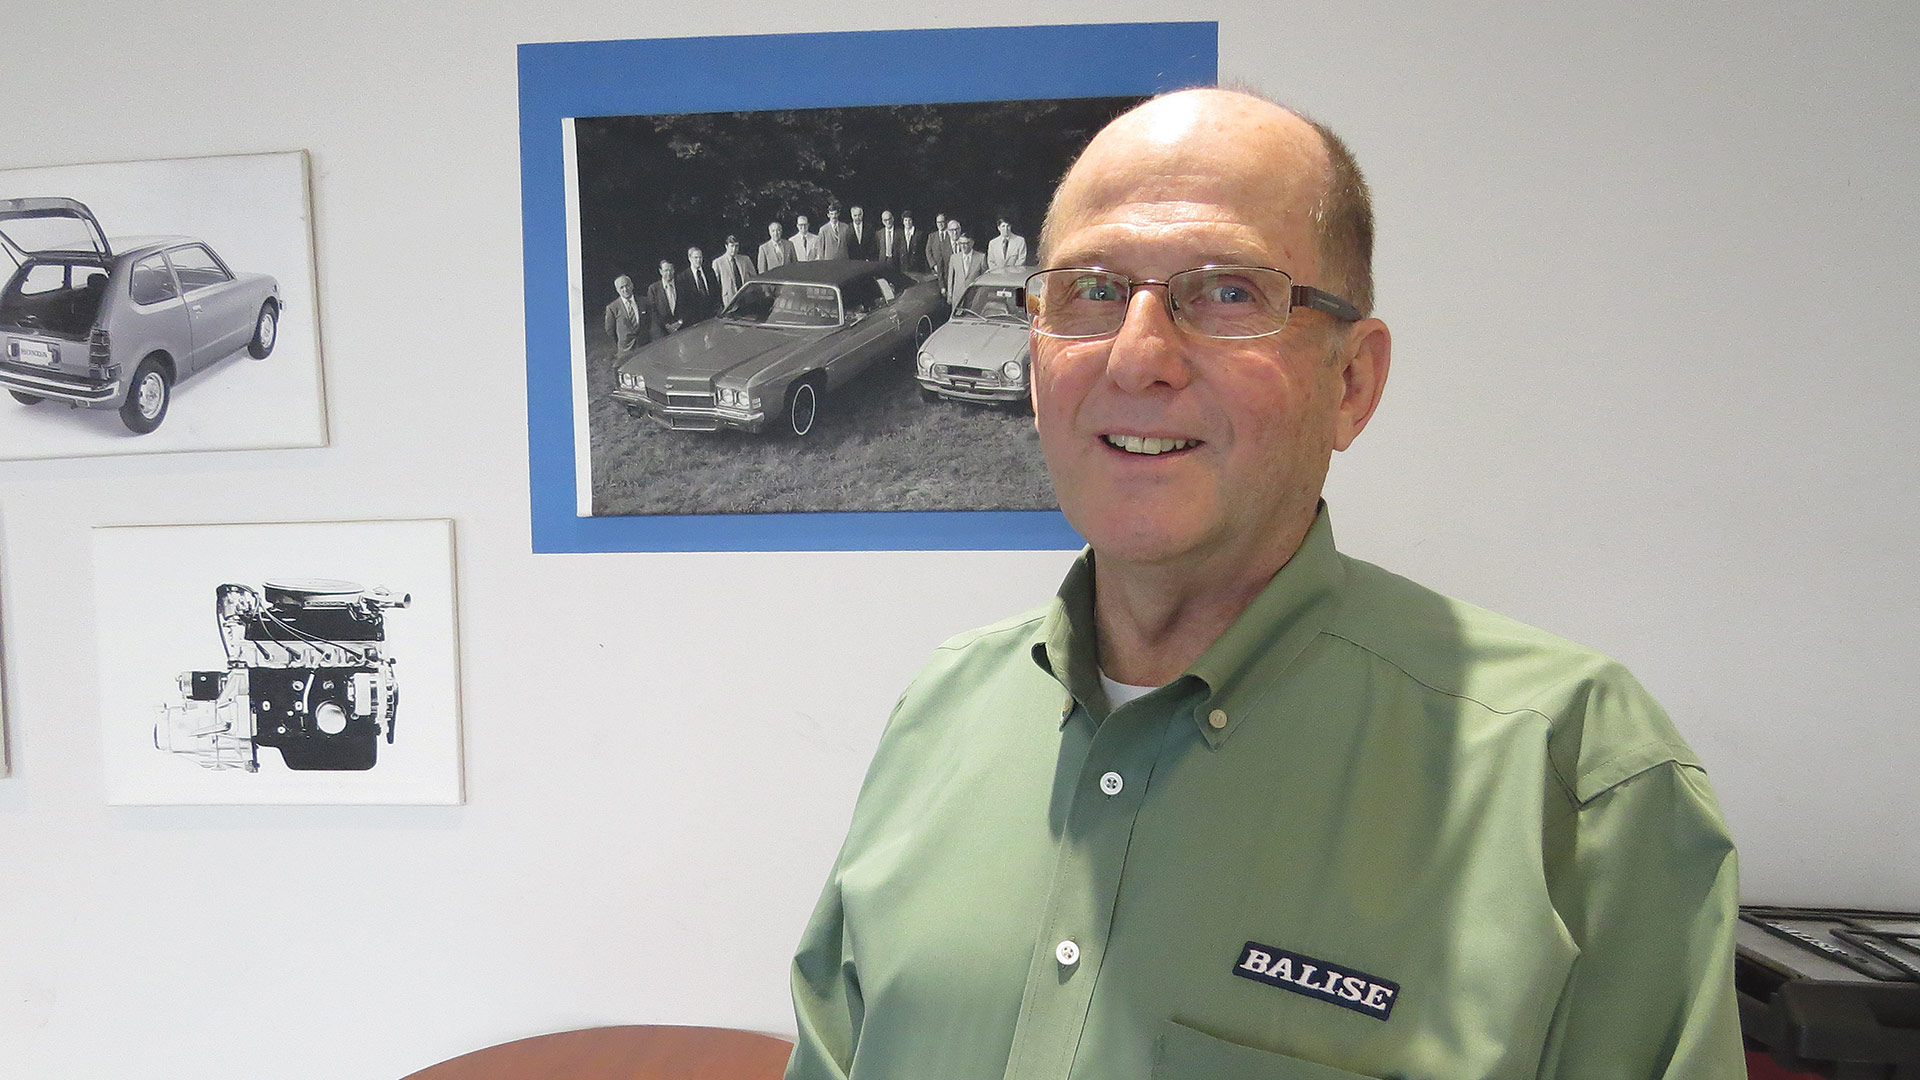 Bobby Balise is the Balise company’s unofficial historian